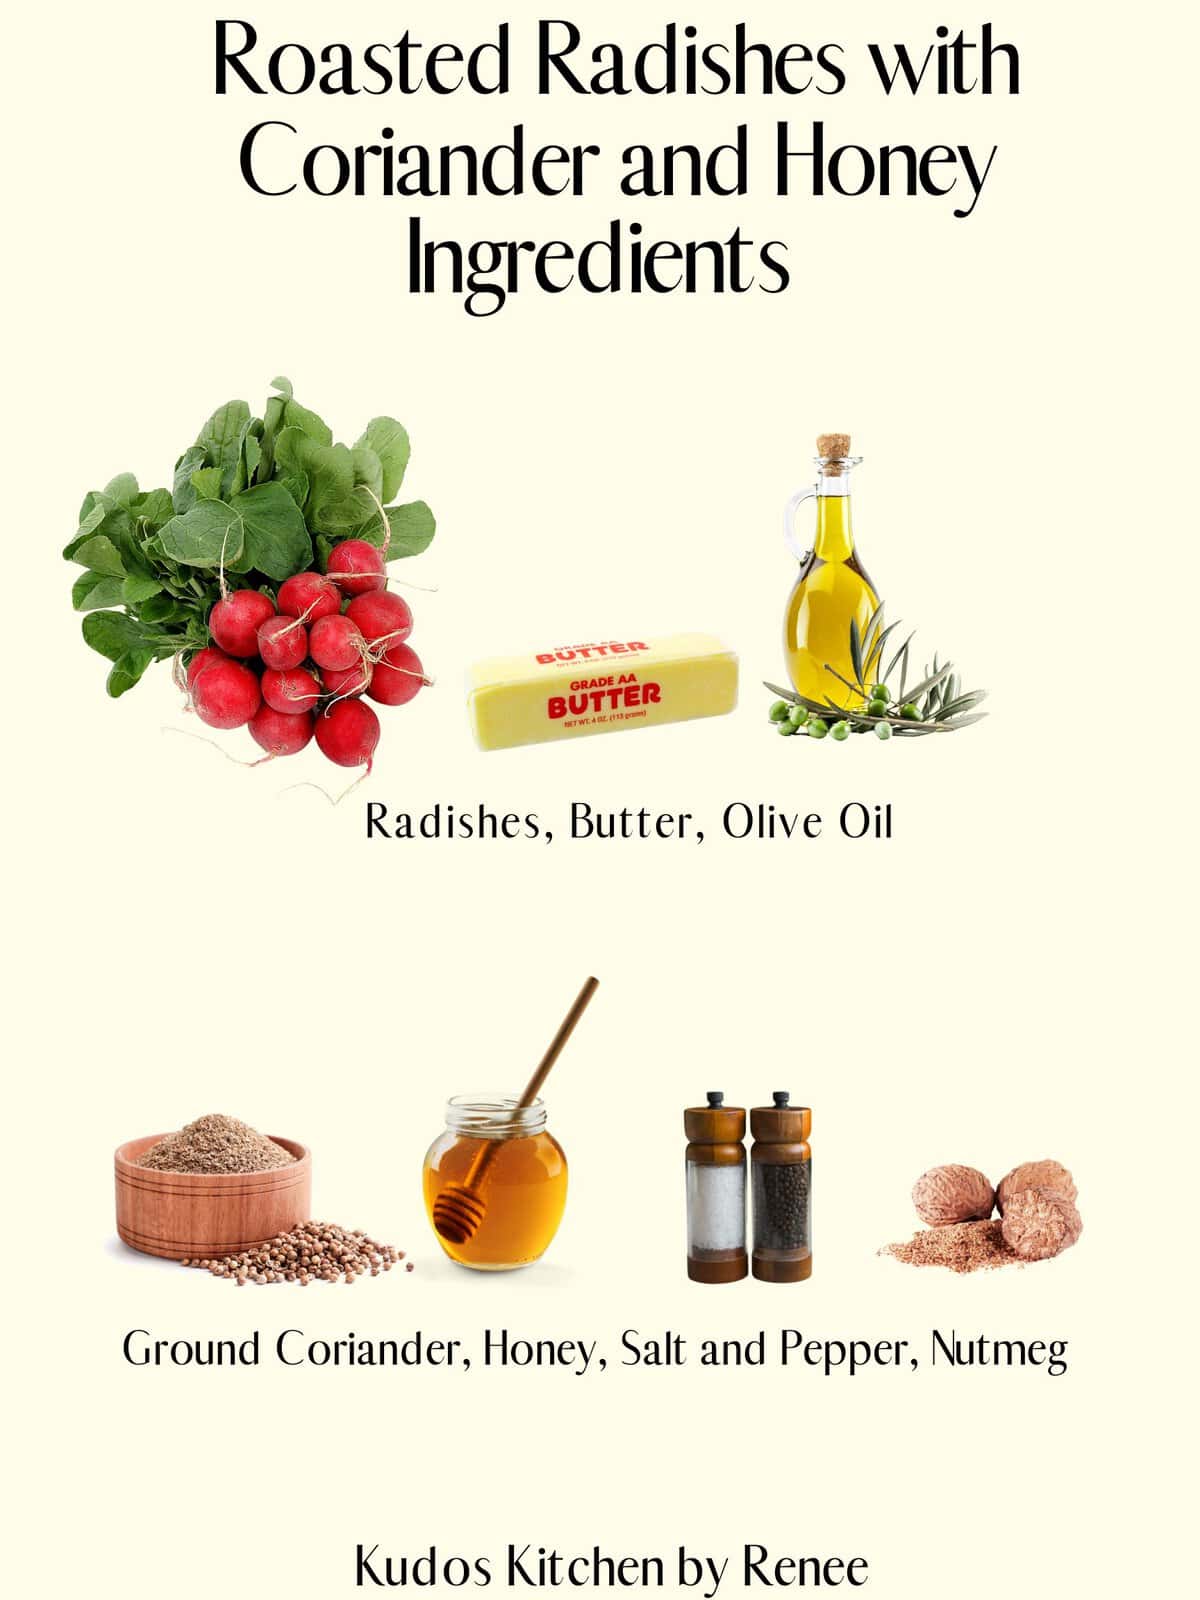 The visual ingredient list for making Roasted Radishes with Coriander and Honey.